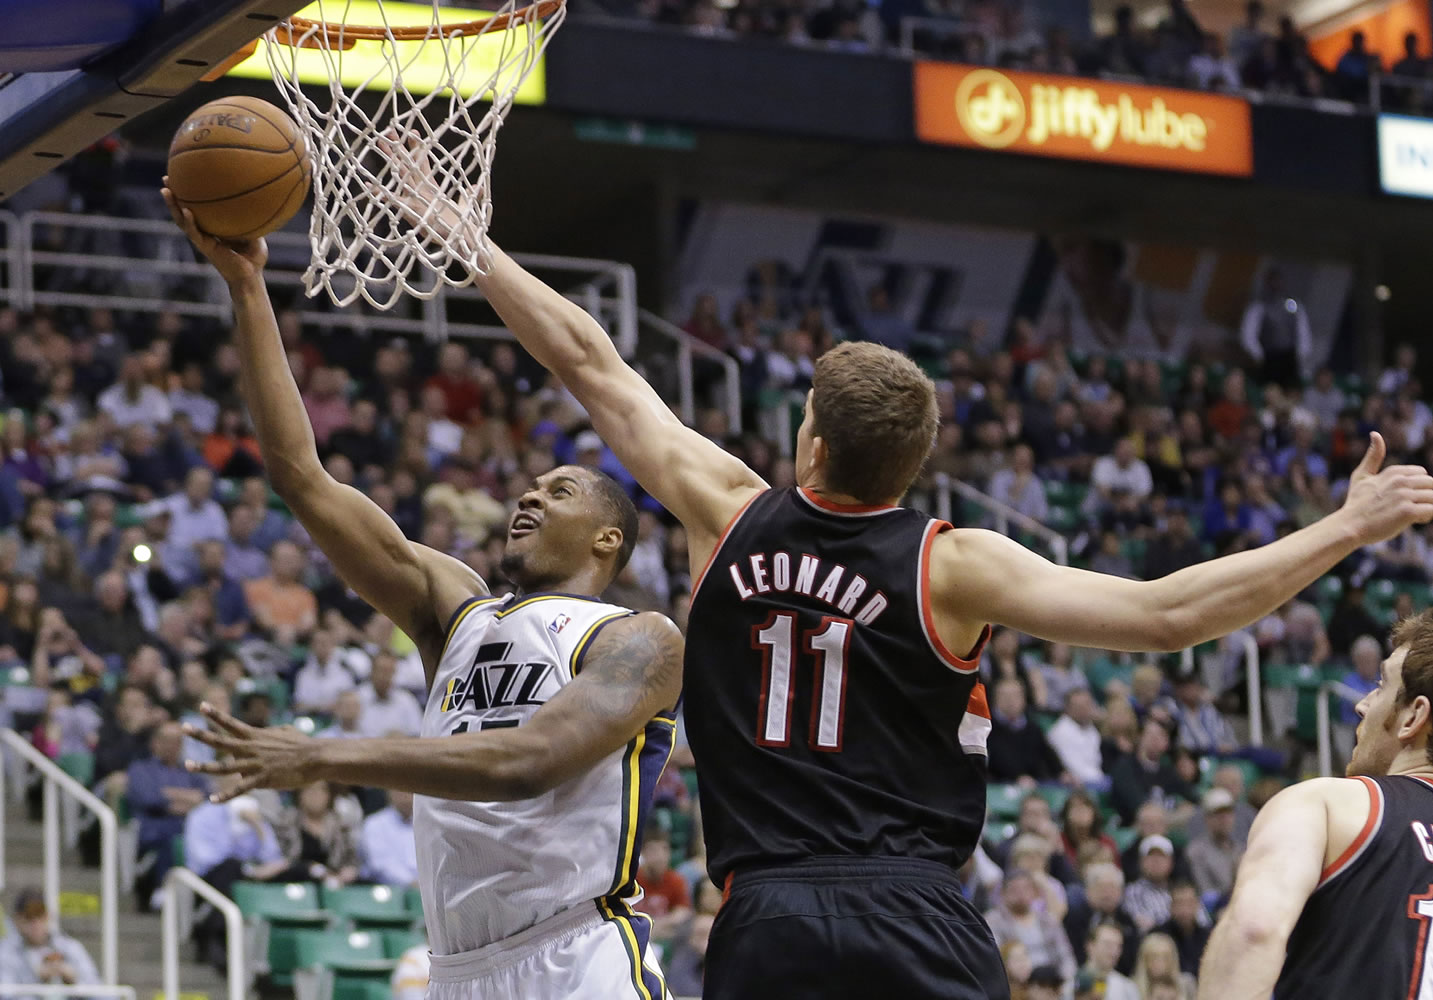 Utah's Derrick Favors (15) goes to the basket as Portland's Meyers Leonard (11) defends in the fourth quarter  Monday at Salt Lake City.